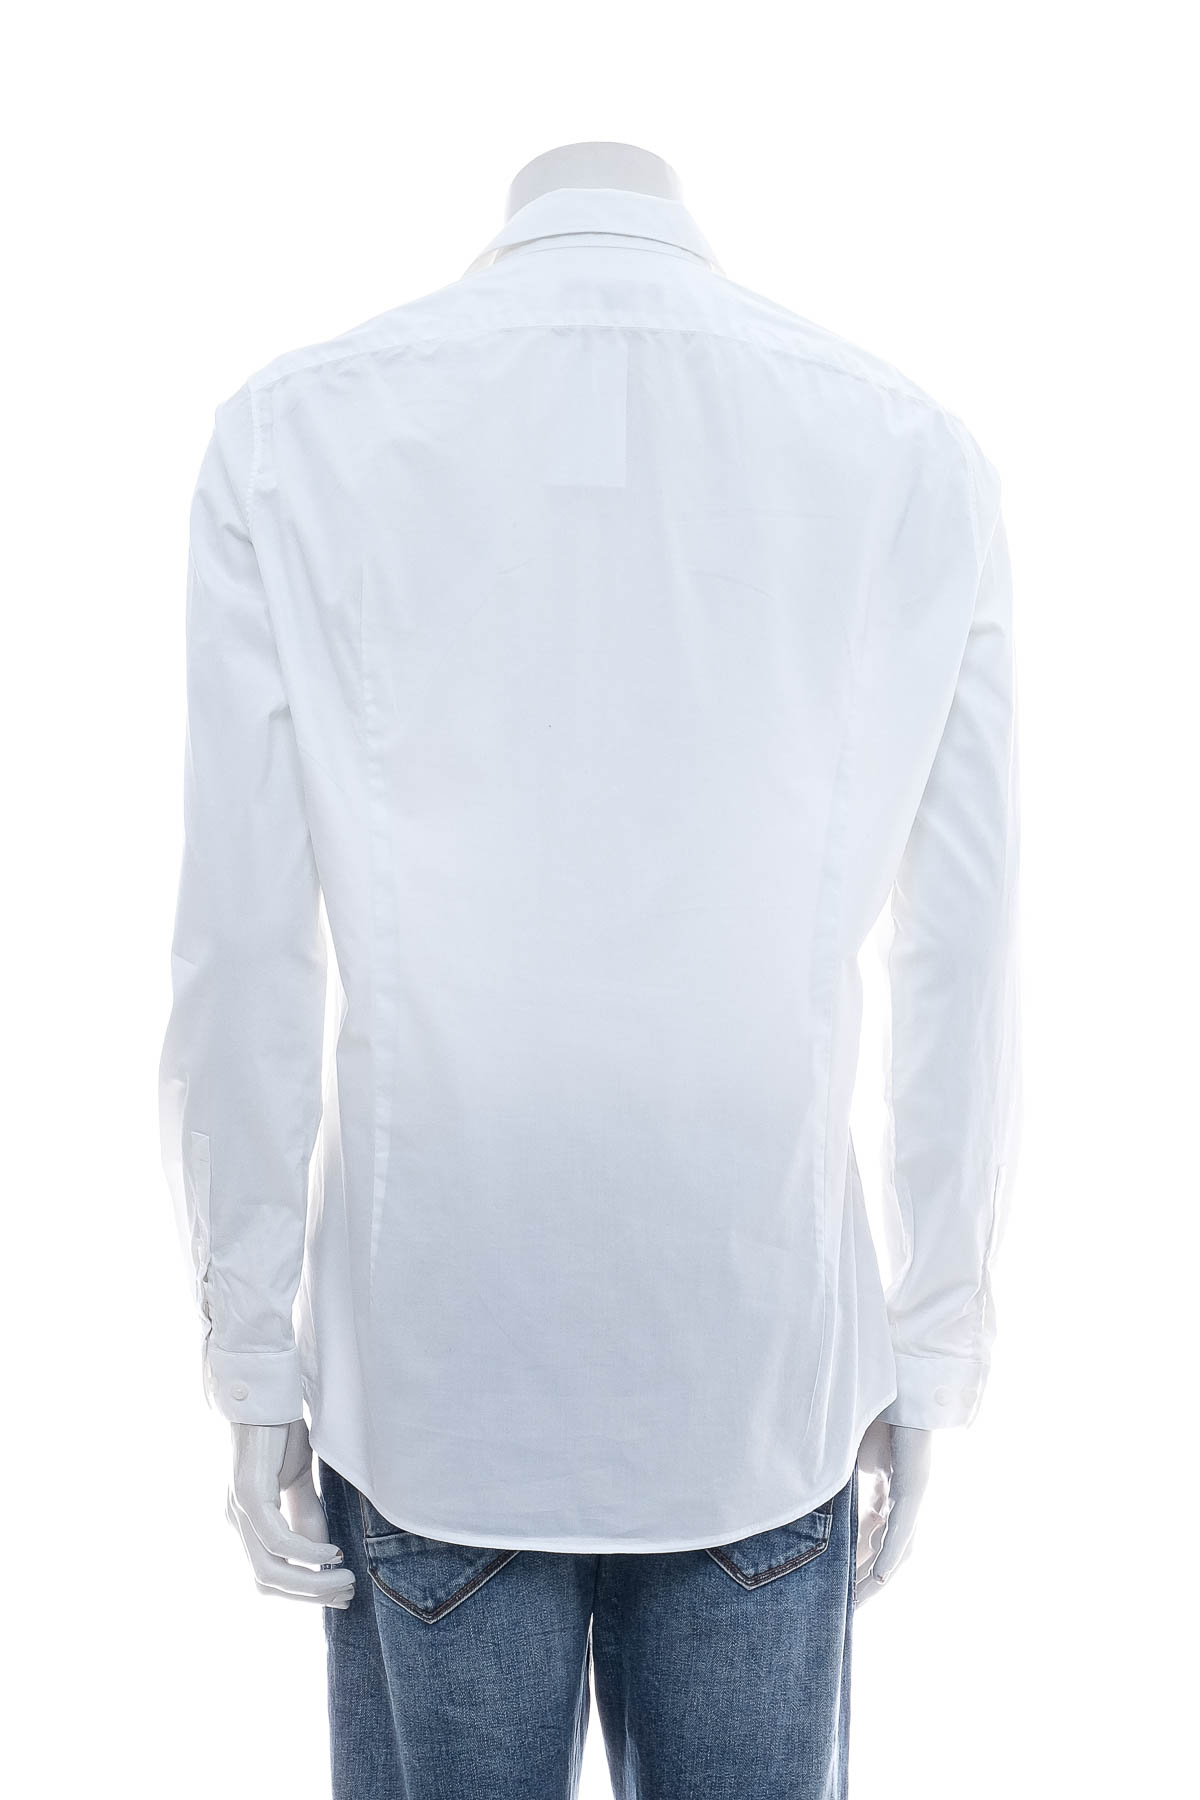 Men's shirt - DRYKORN FOR BEAUTIFUL PEOPLE - 1